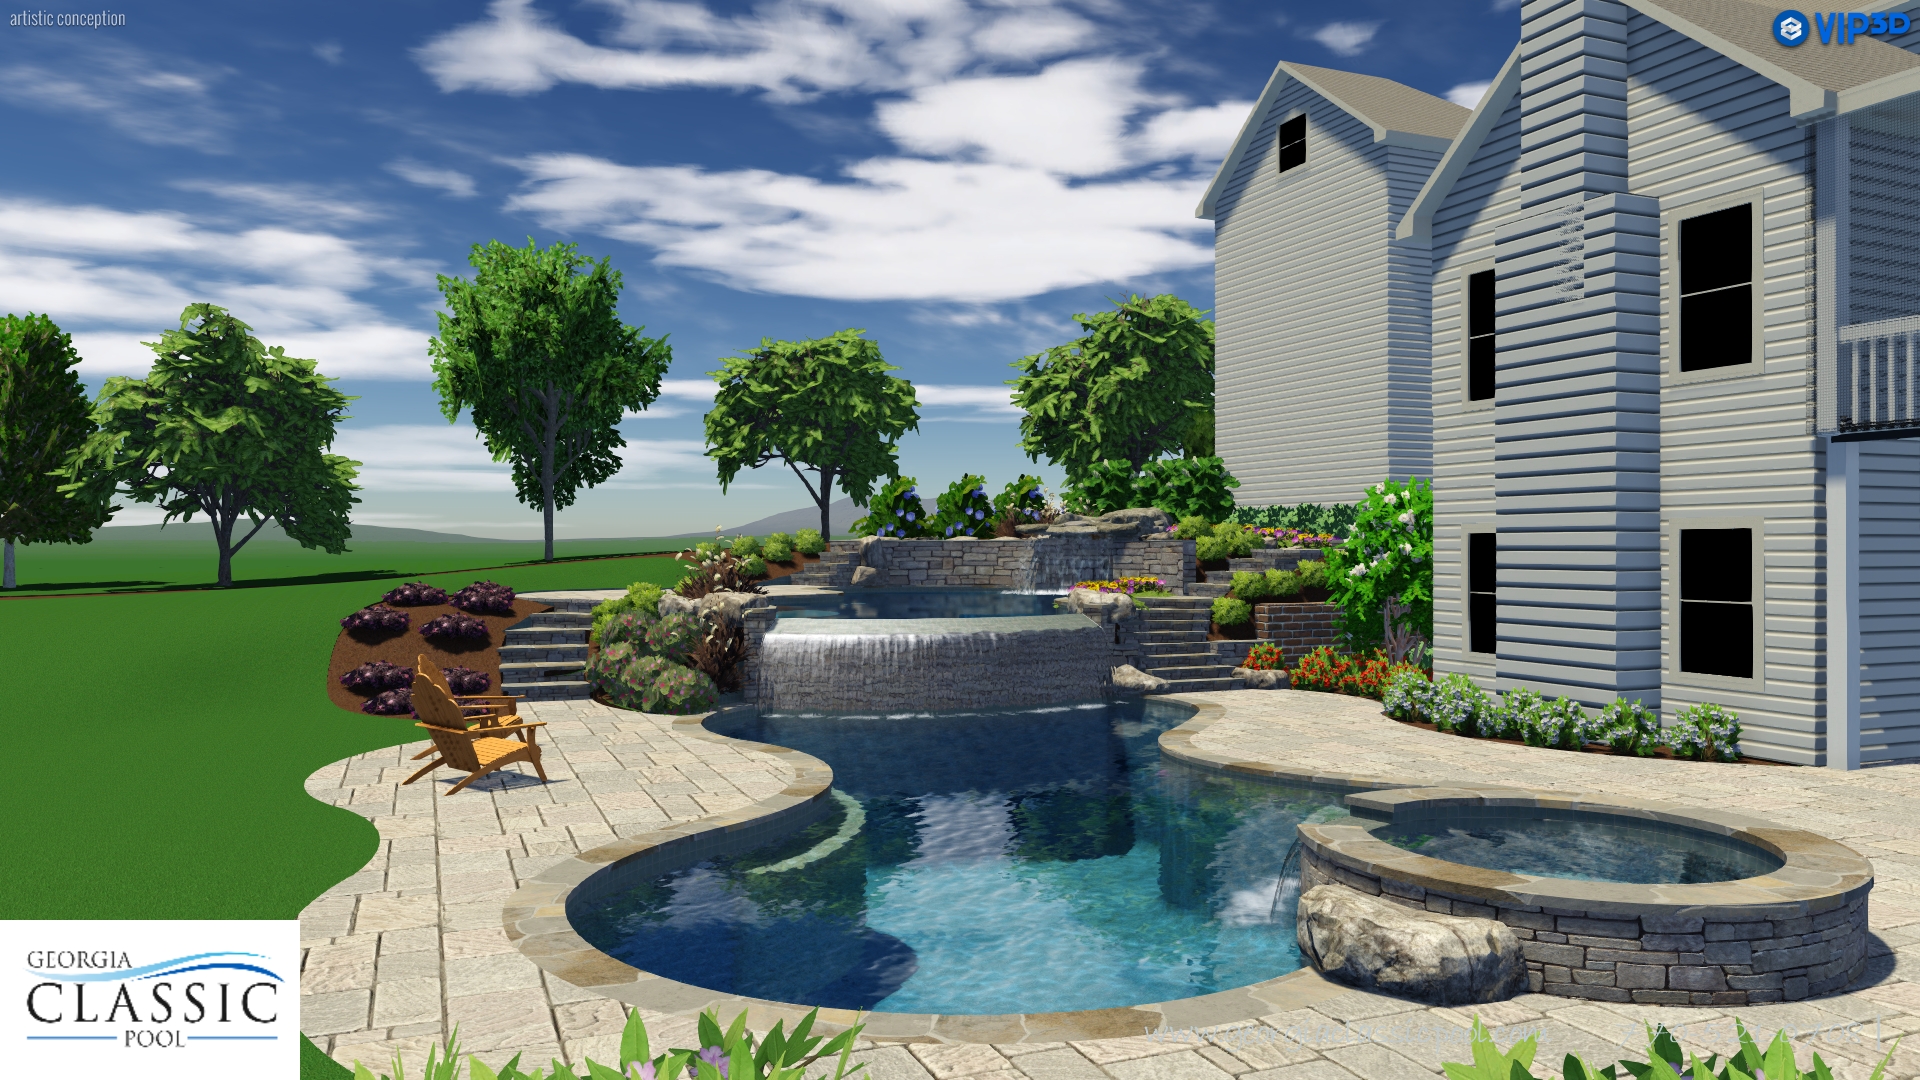 A 3D rendering of a modern double pool with a waterfall cascading into one pool and a spa adjacent to the other.